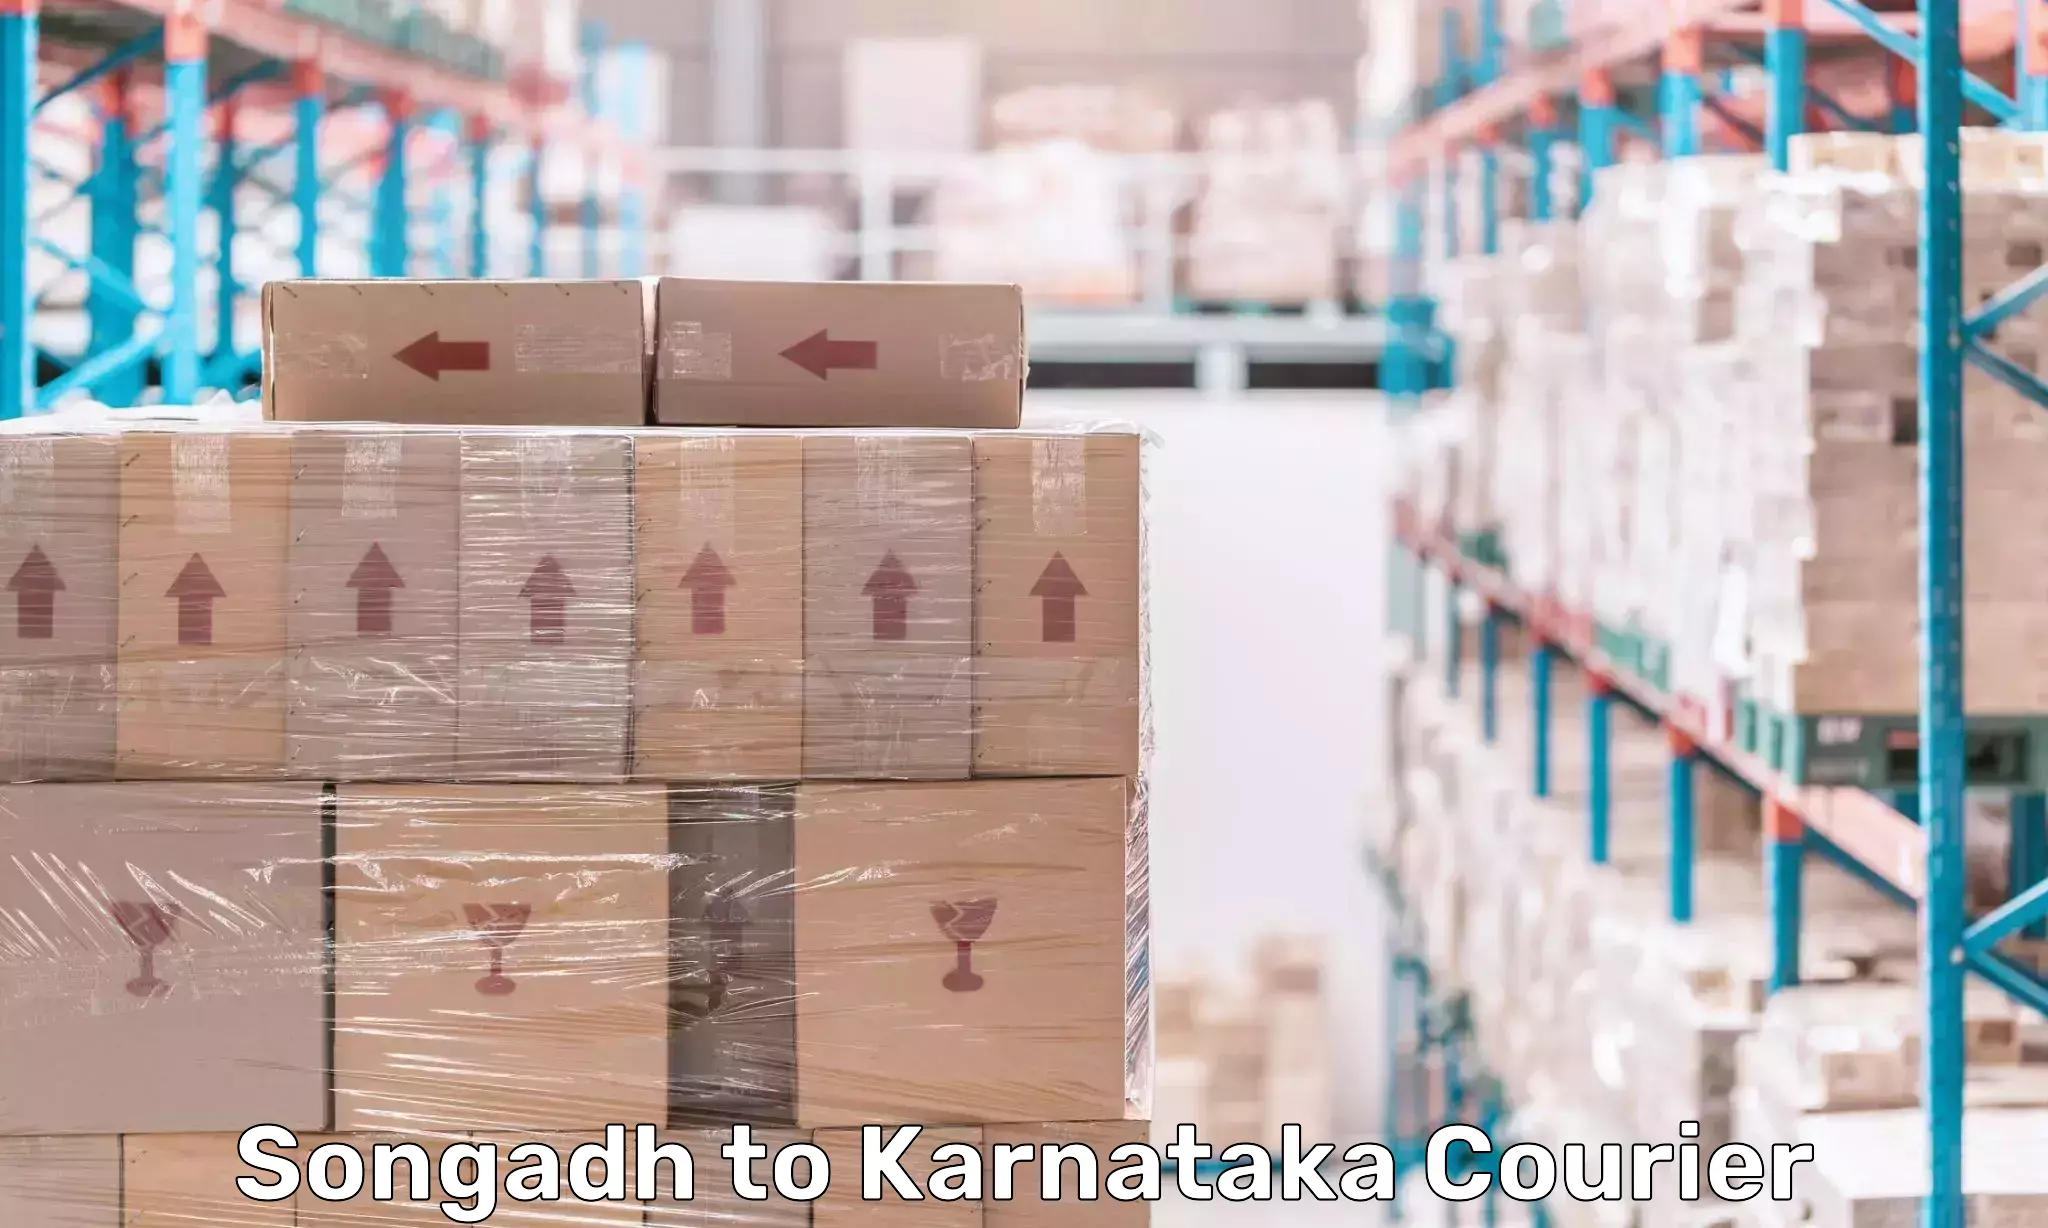 Efficient courier operations Songadh to Karnataka